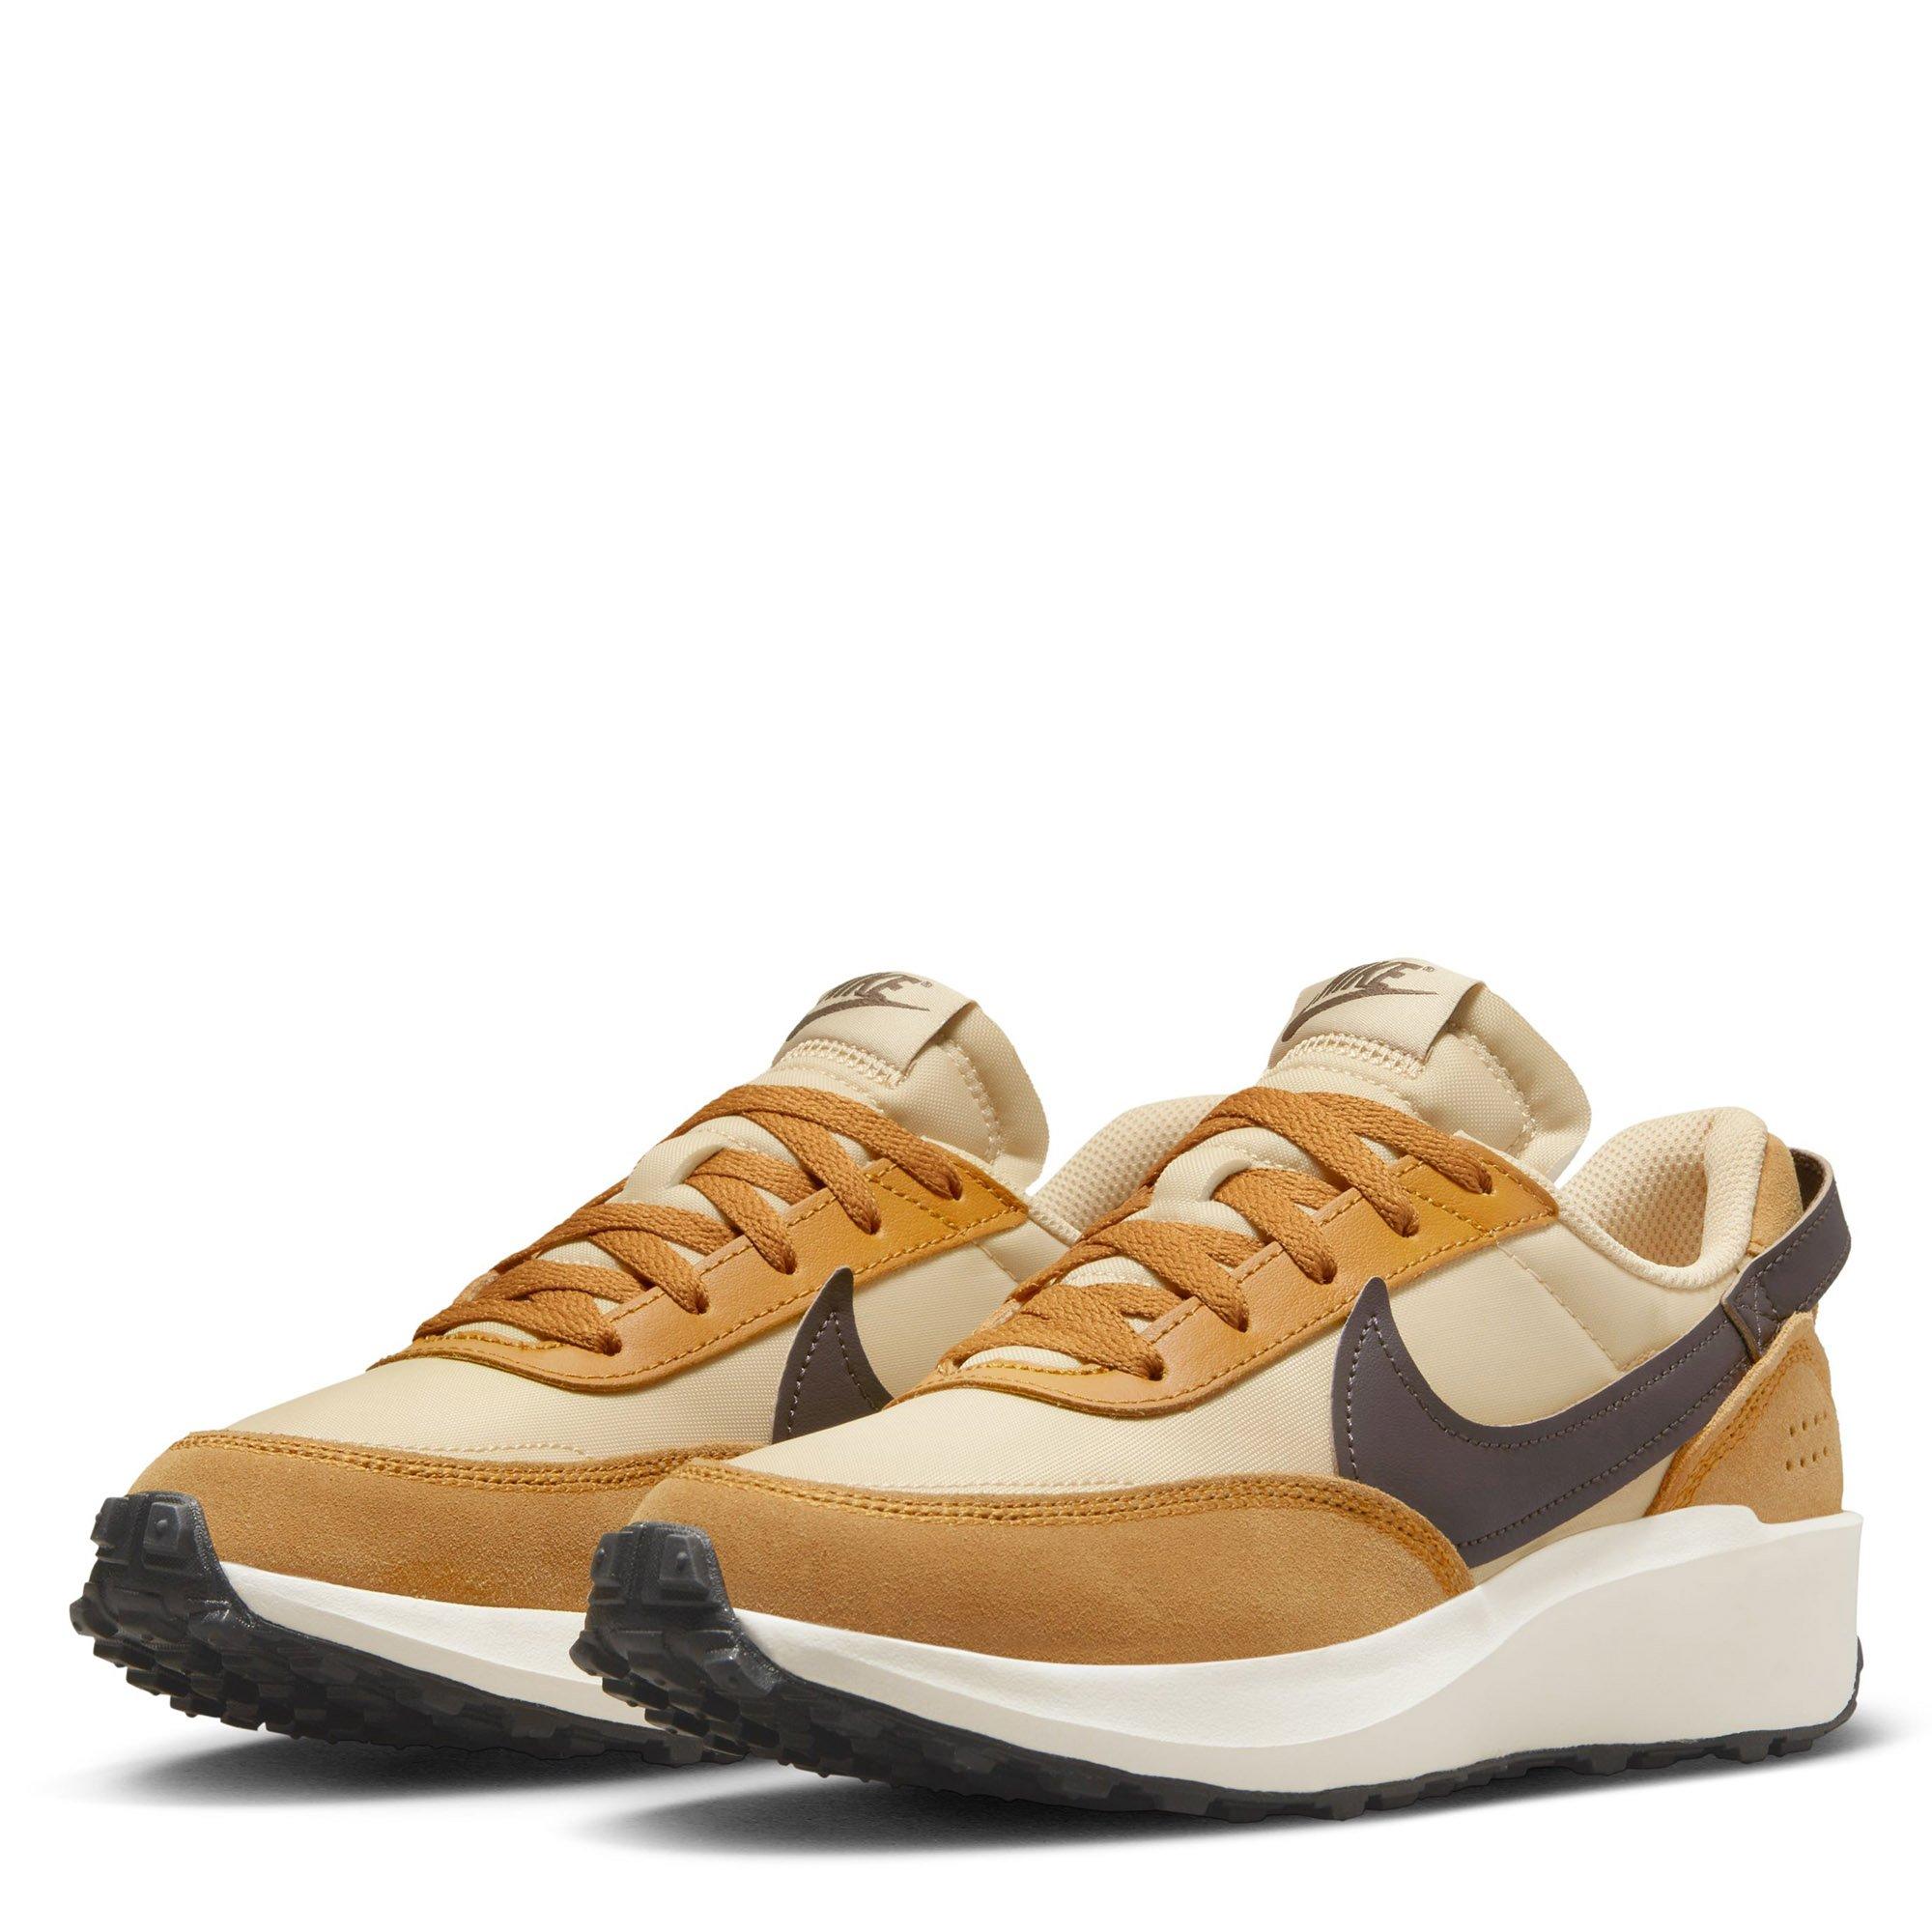 Nike | Waffle Debut Womens Shoes | Runners | Sports Direct MY